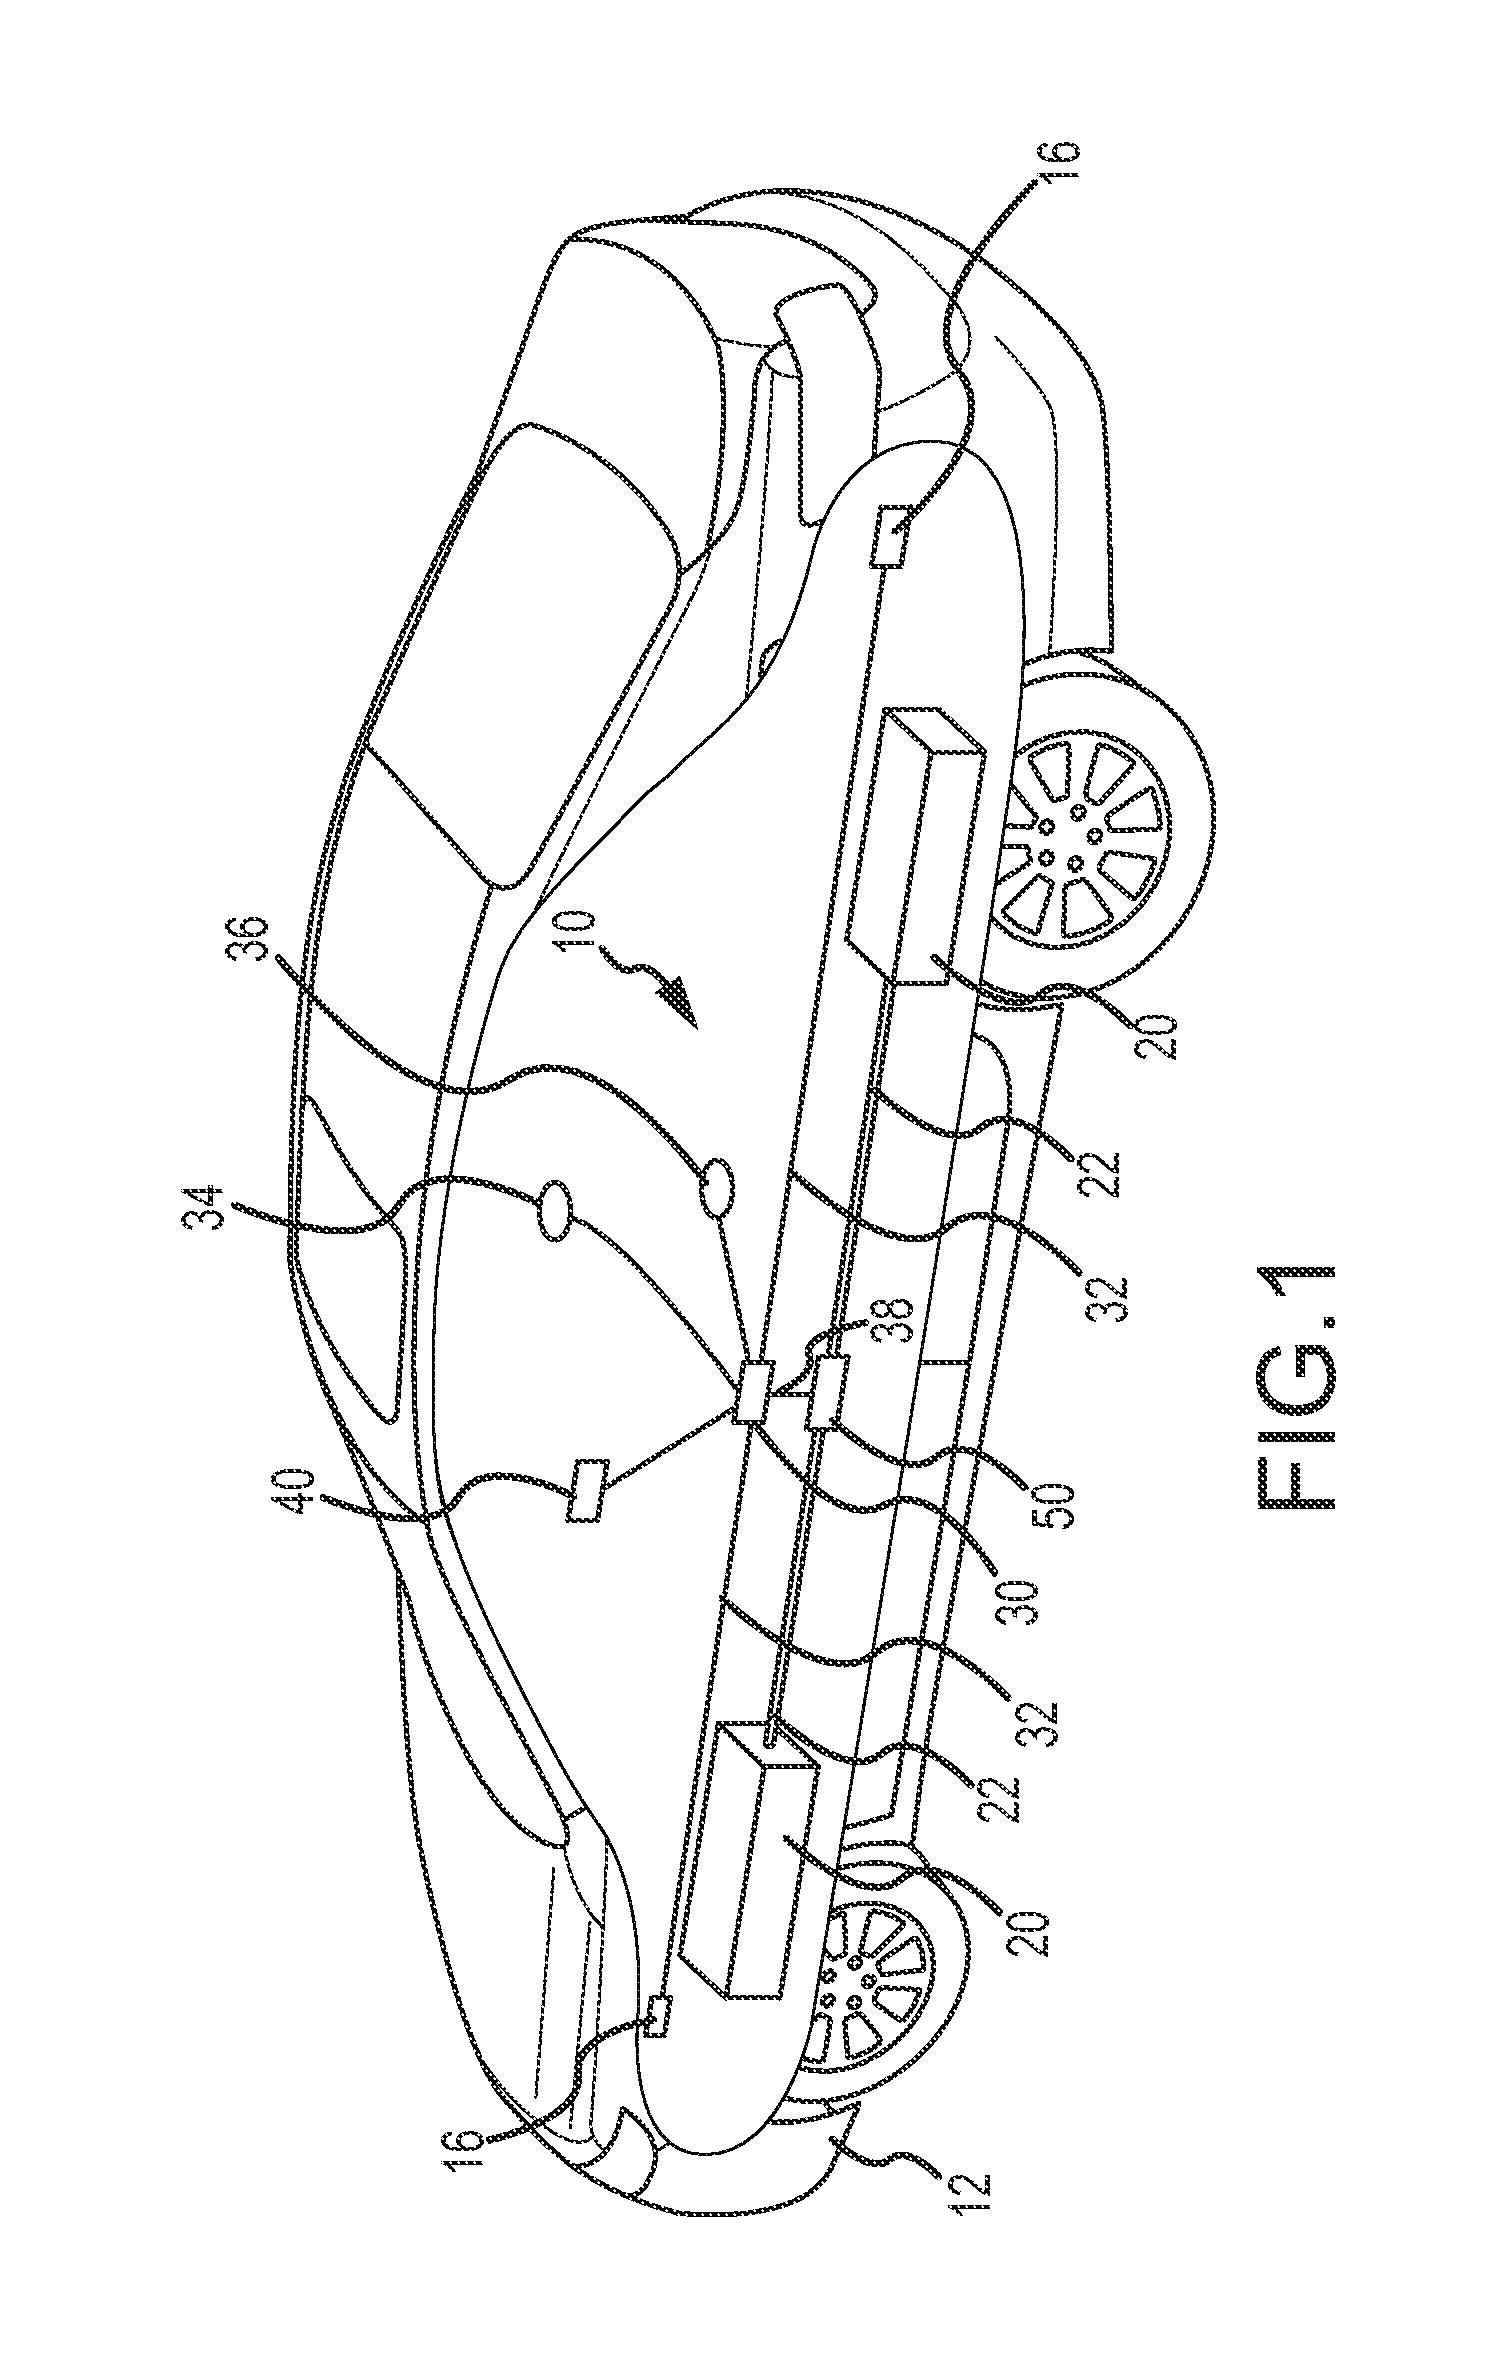 Fire suppression system for an onboard electrical energy source